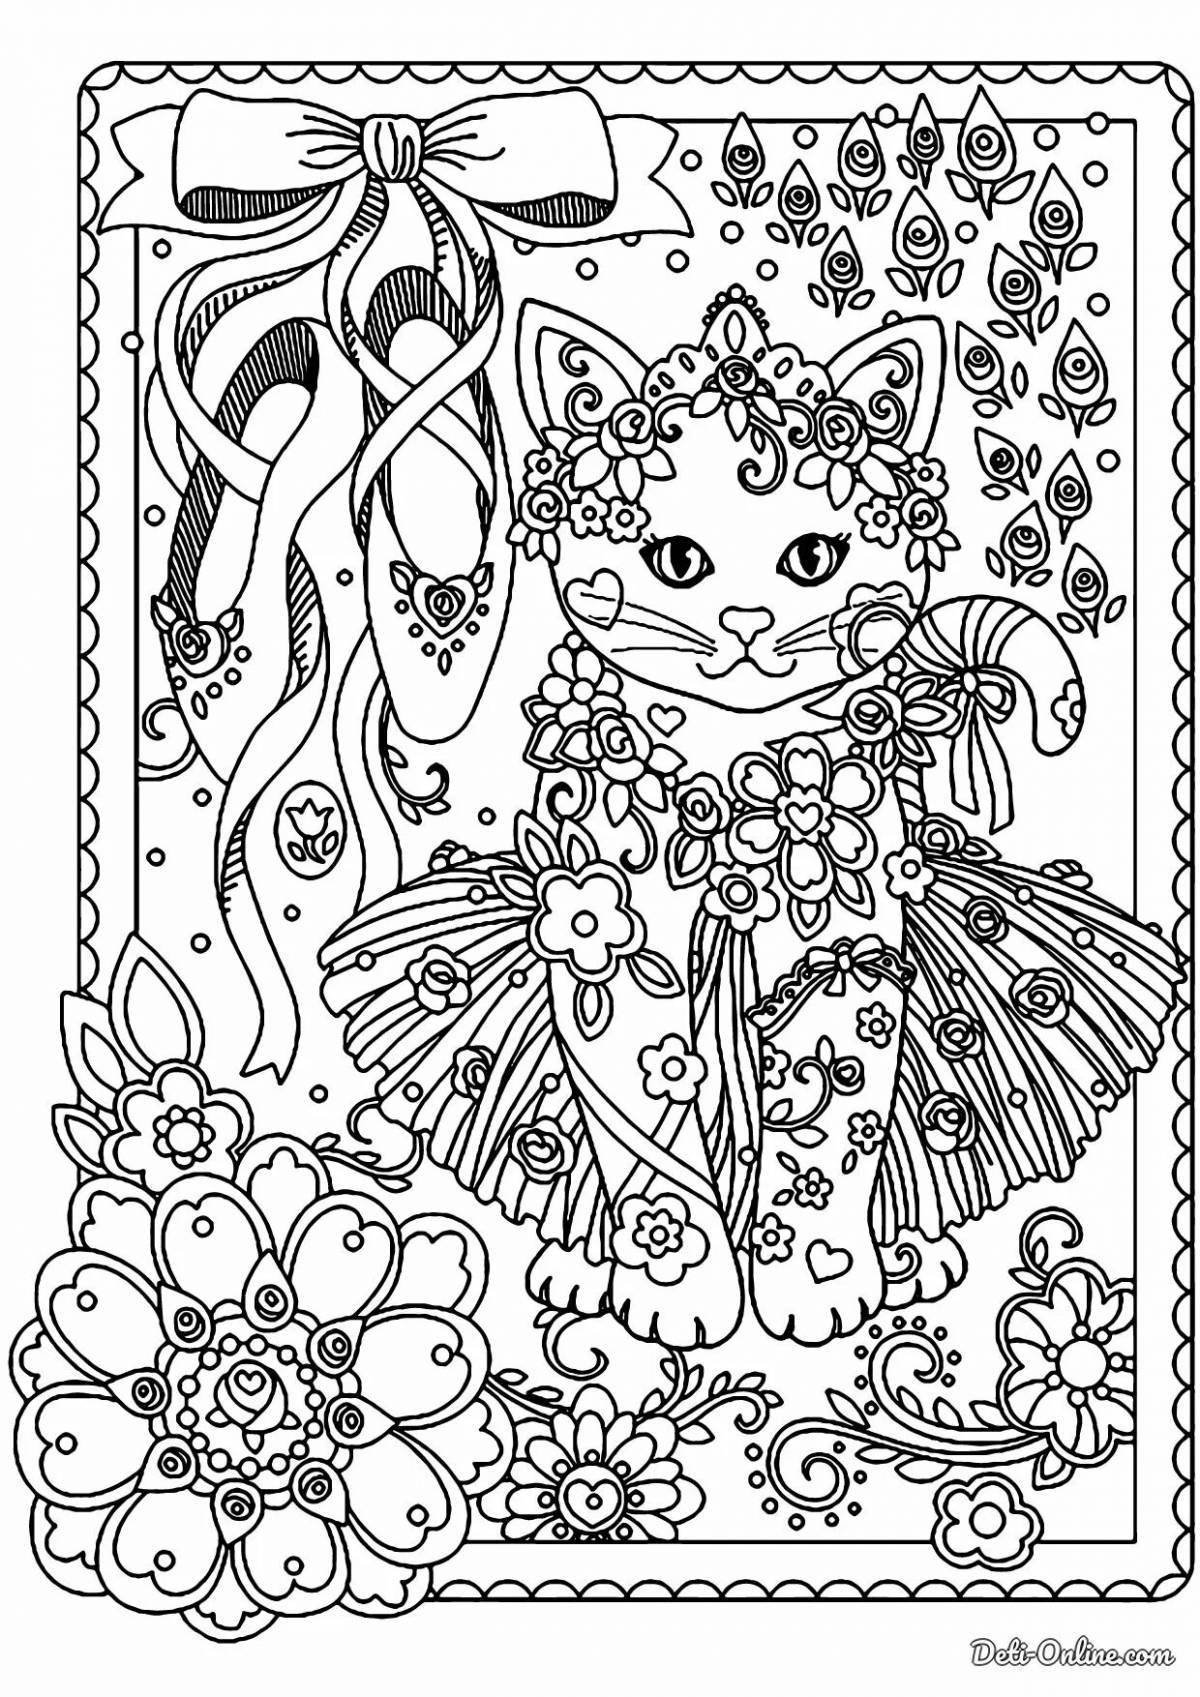 Coloring page amazing ballerina cat